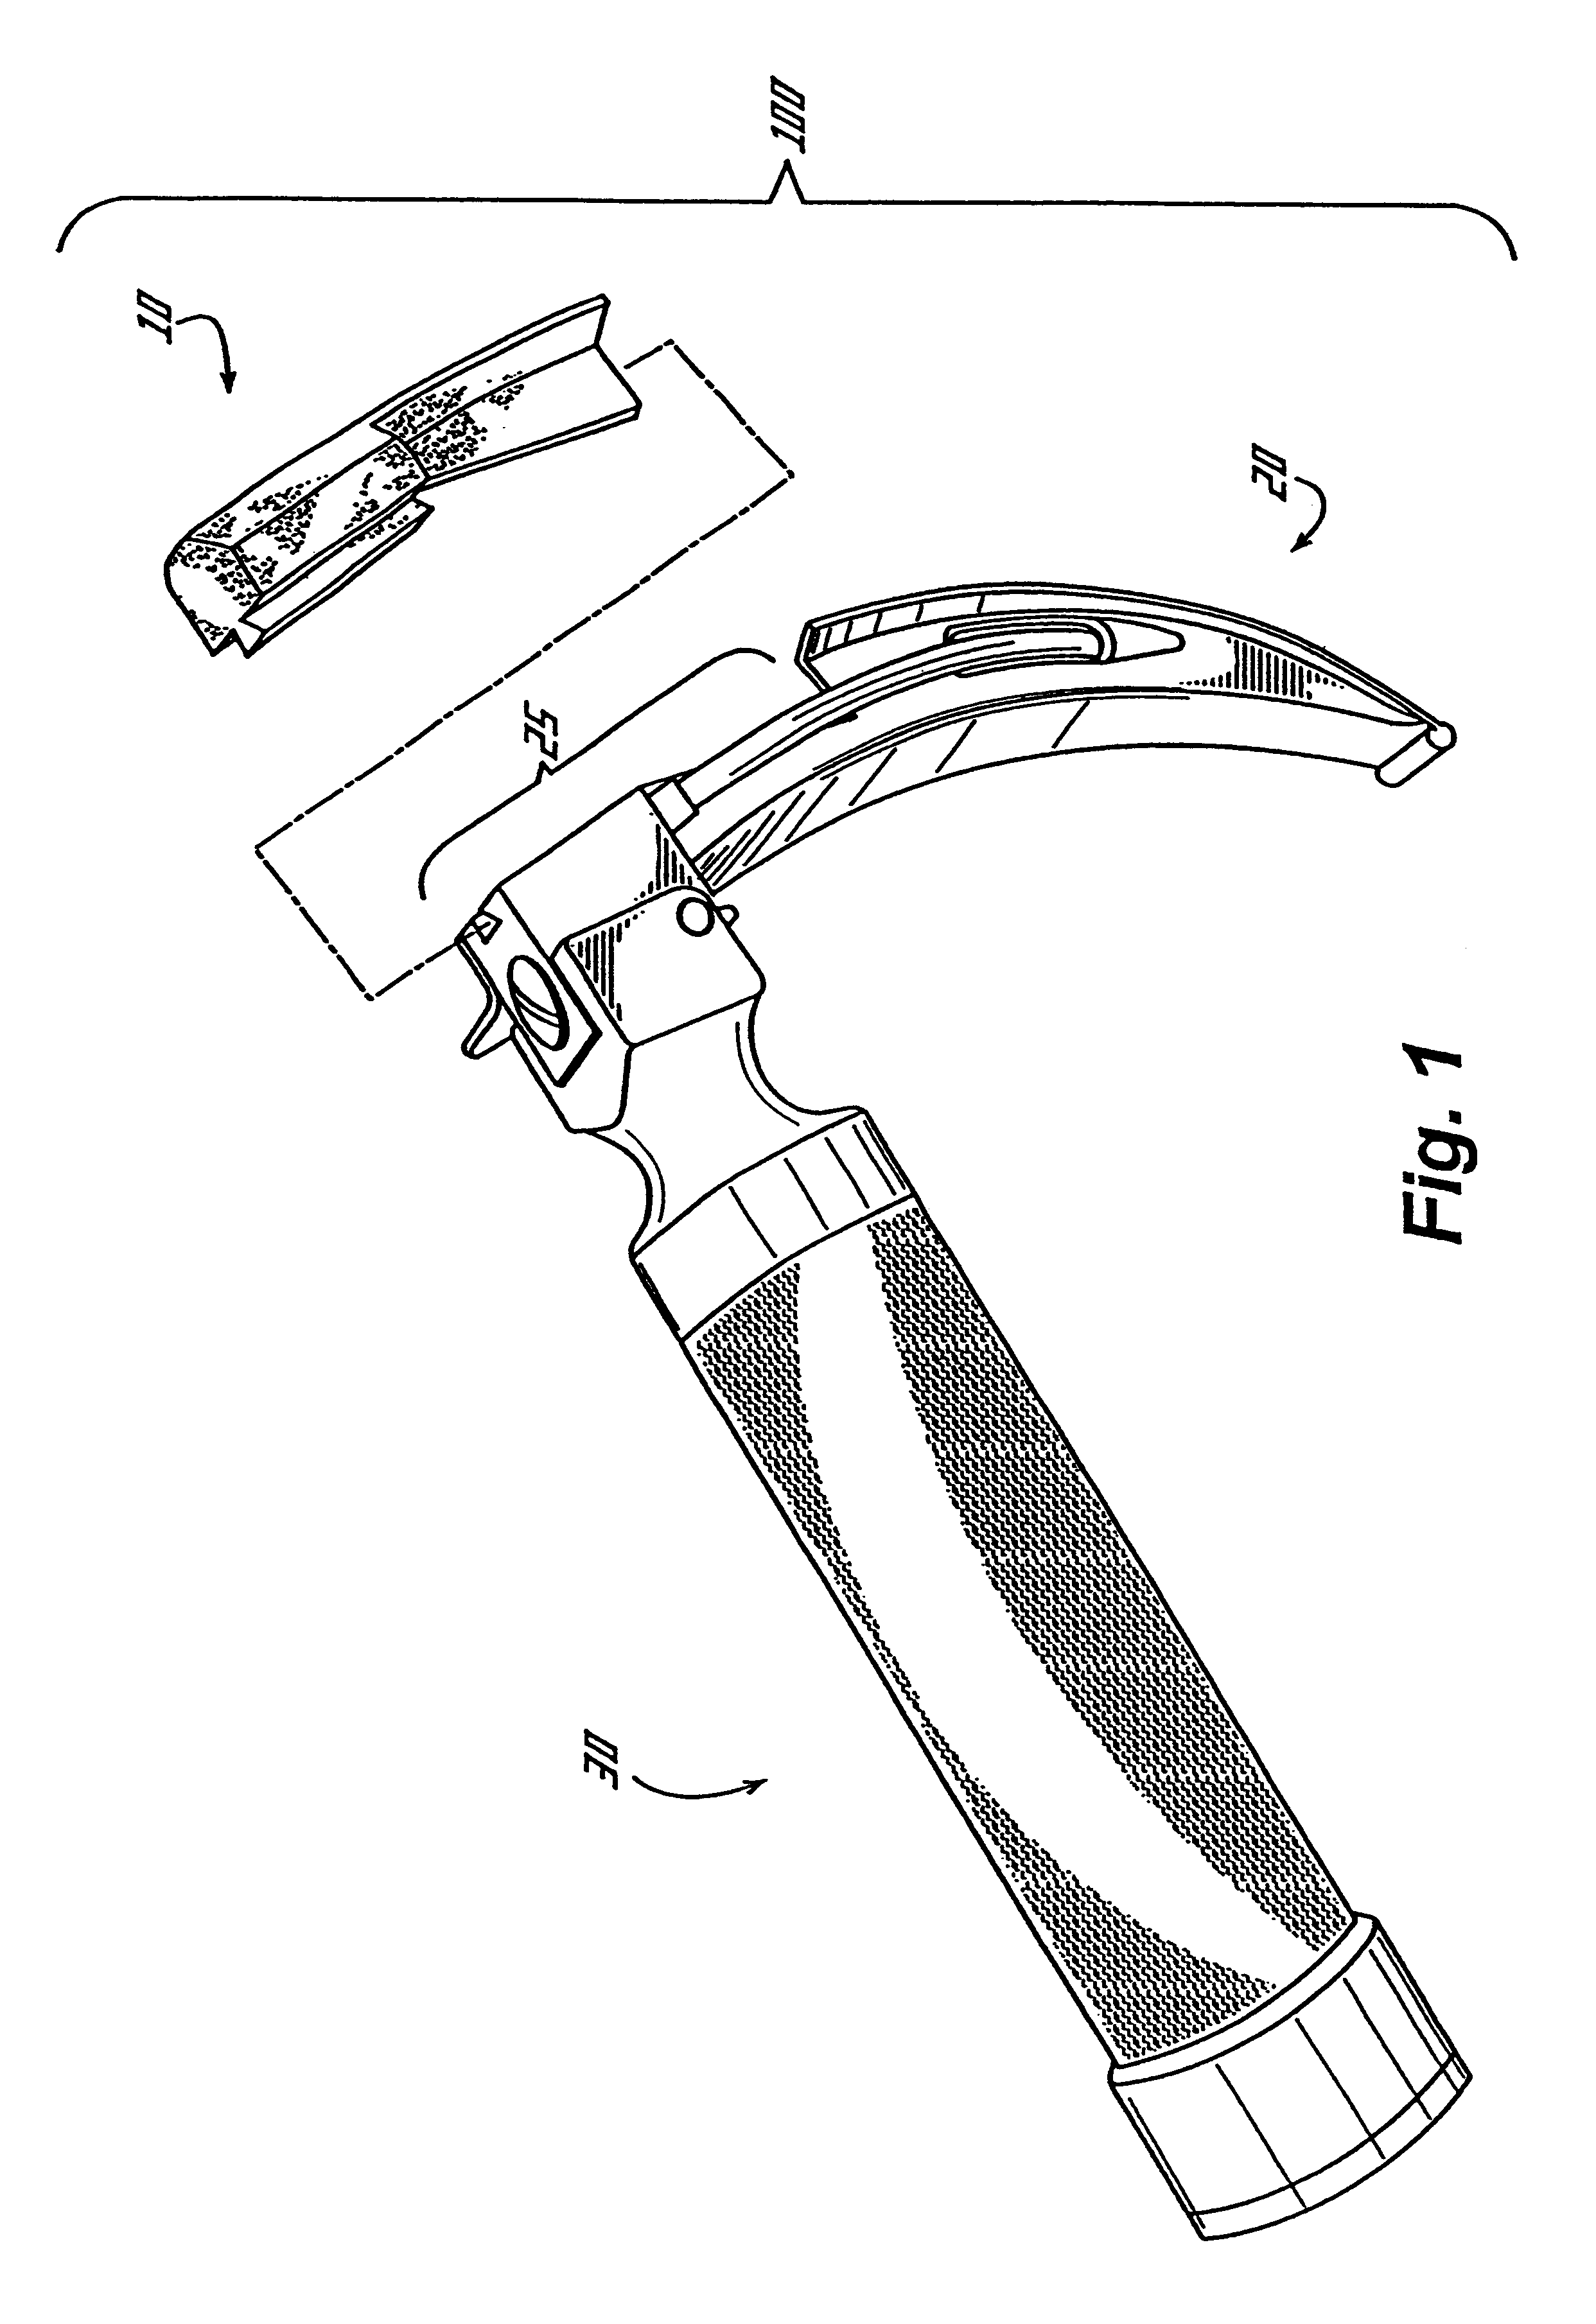 Modified laryngoscope blade to reduce dental injuries during intubation